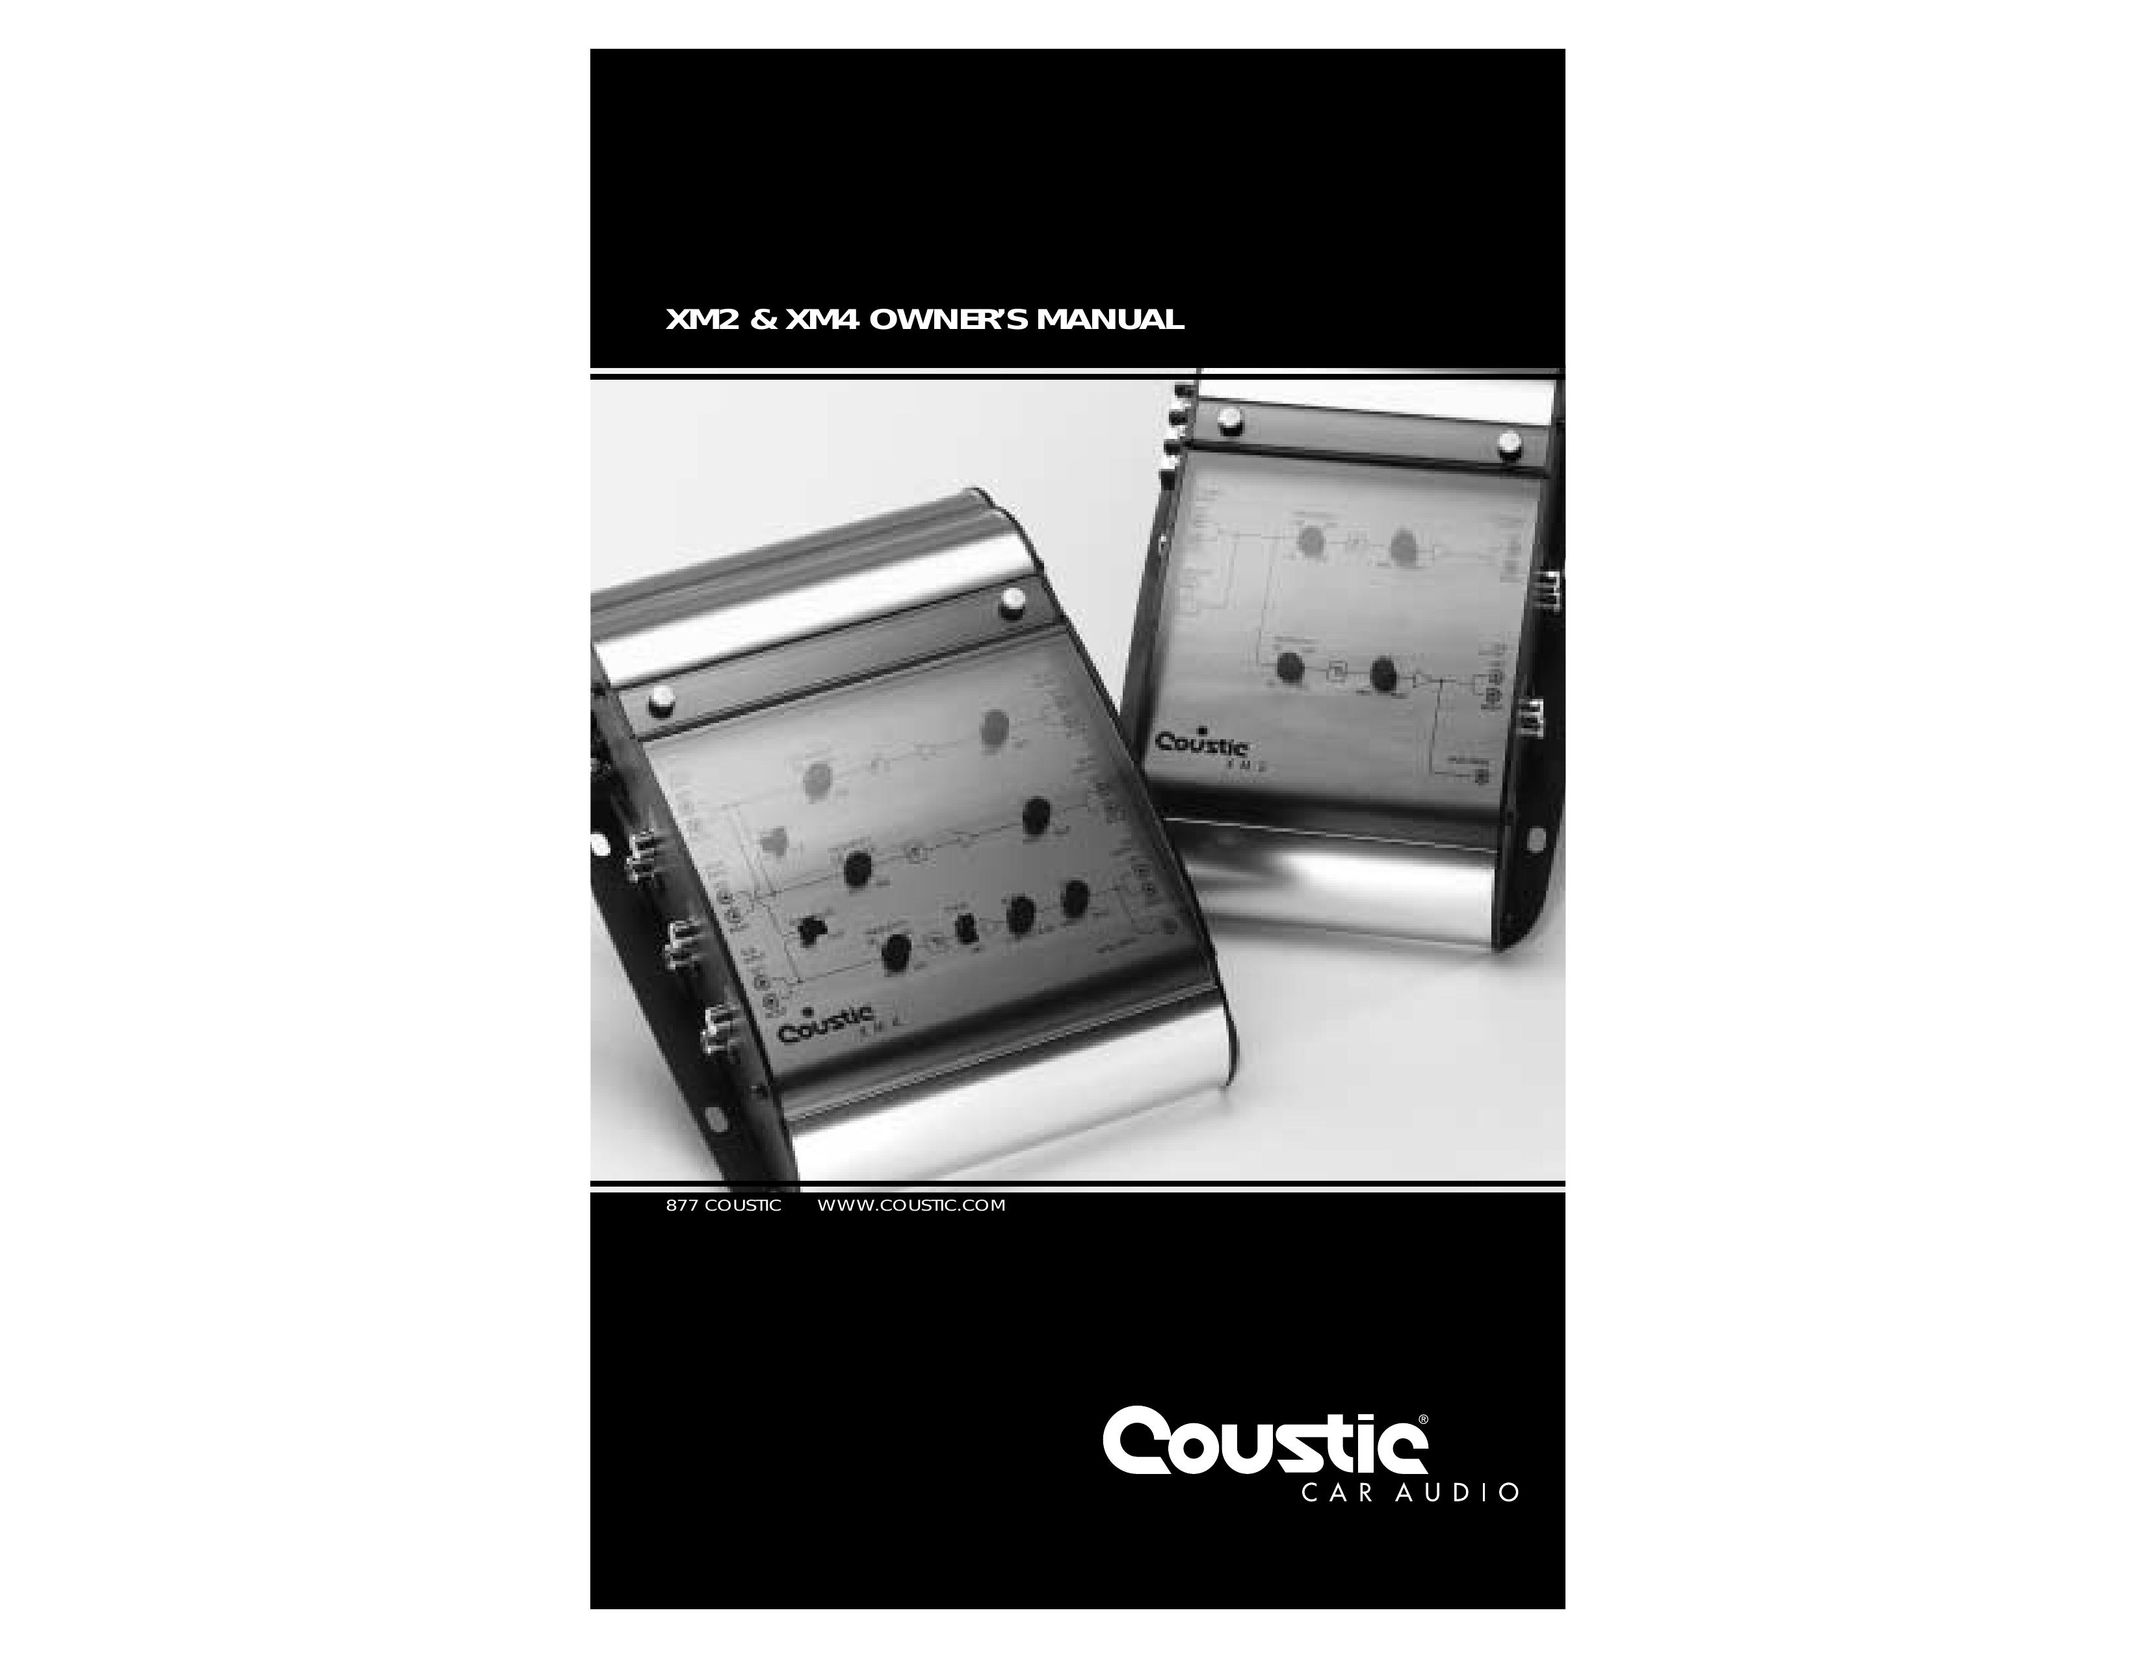 Coustic car audio Car Stereo System User Manual